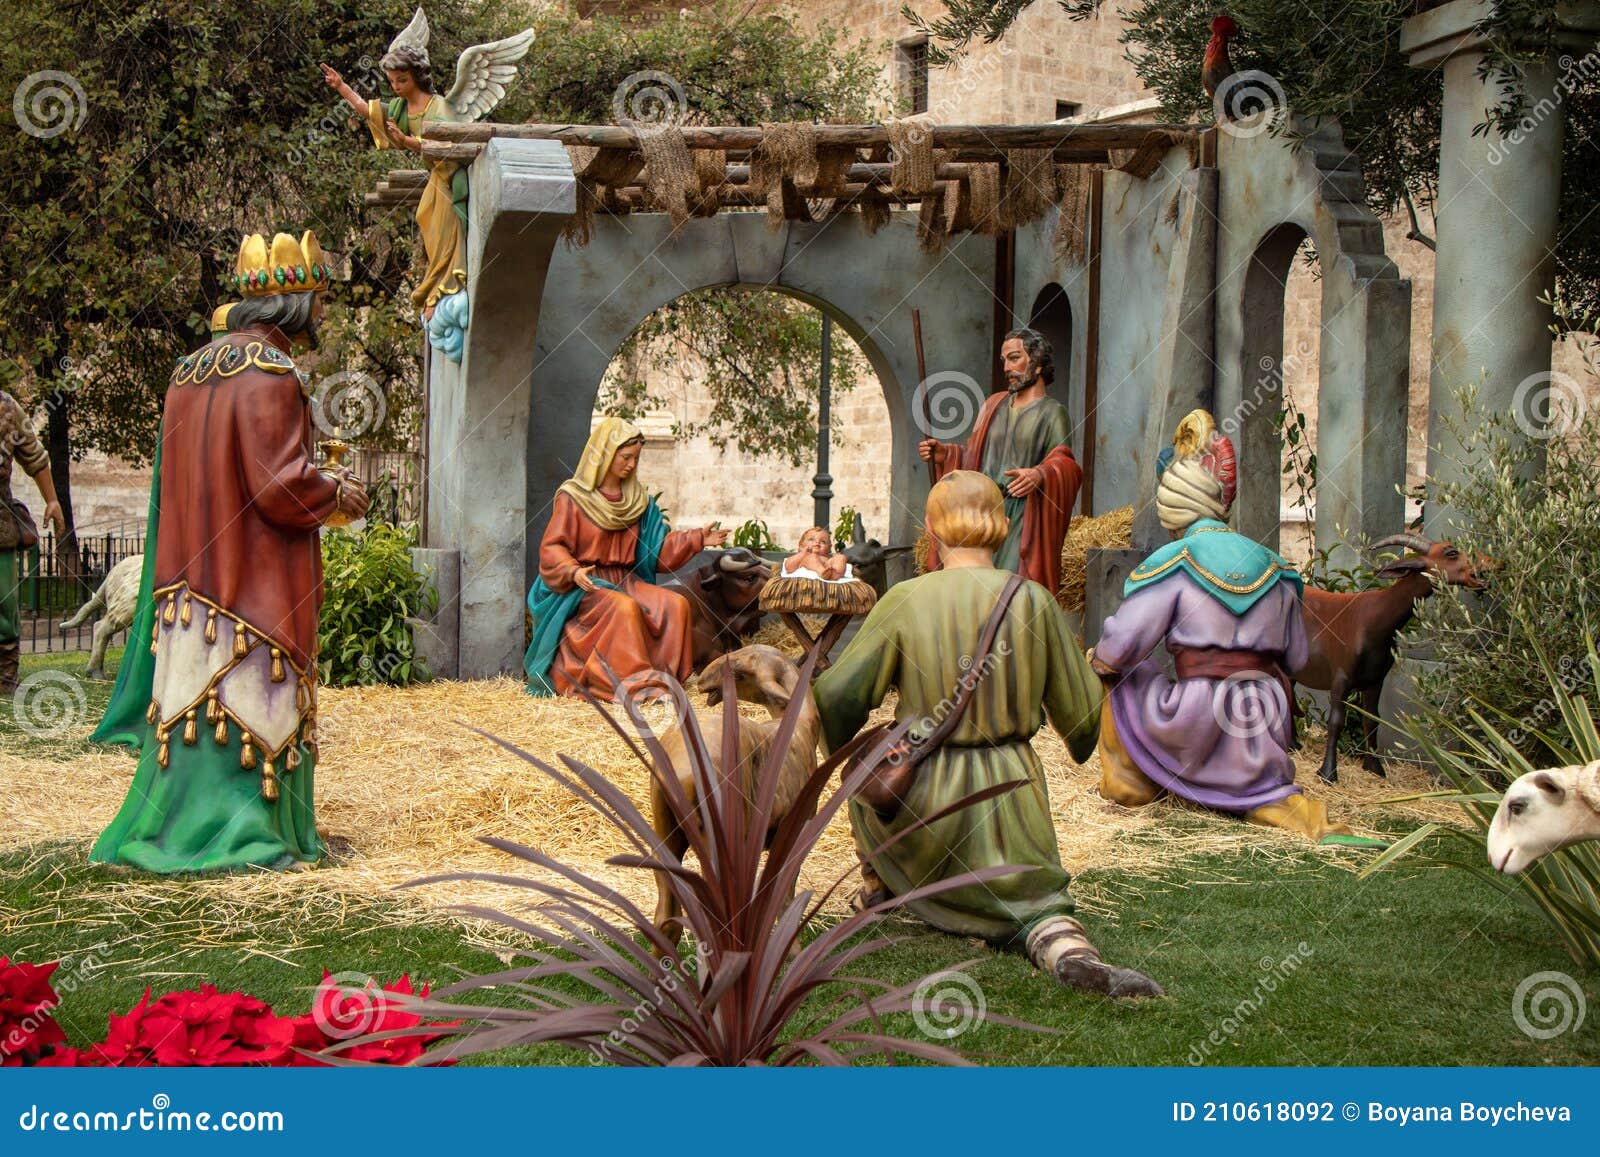 The Birth of Jesus Christ, a Religious Scene from Christianity ...